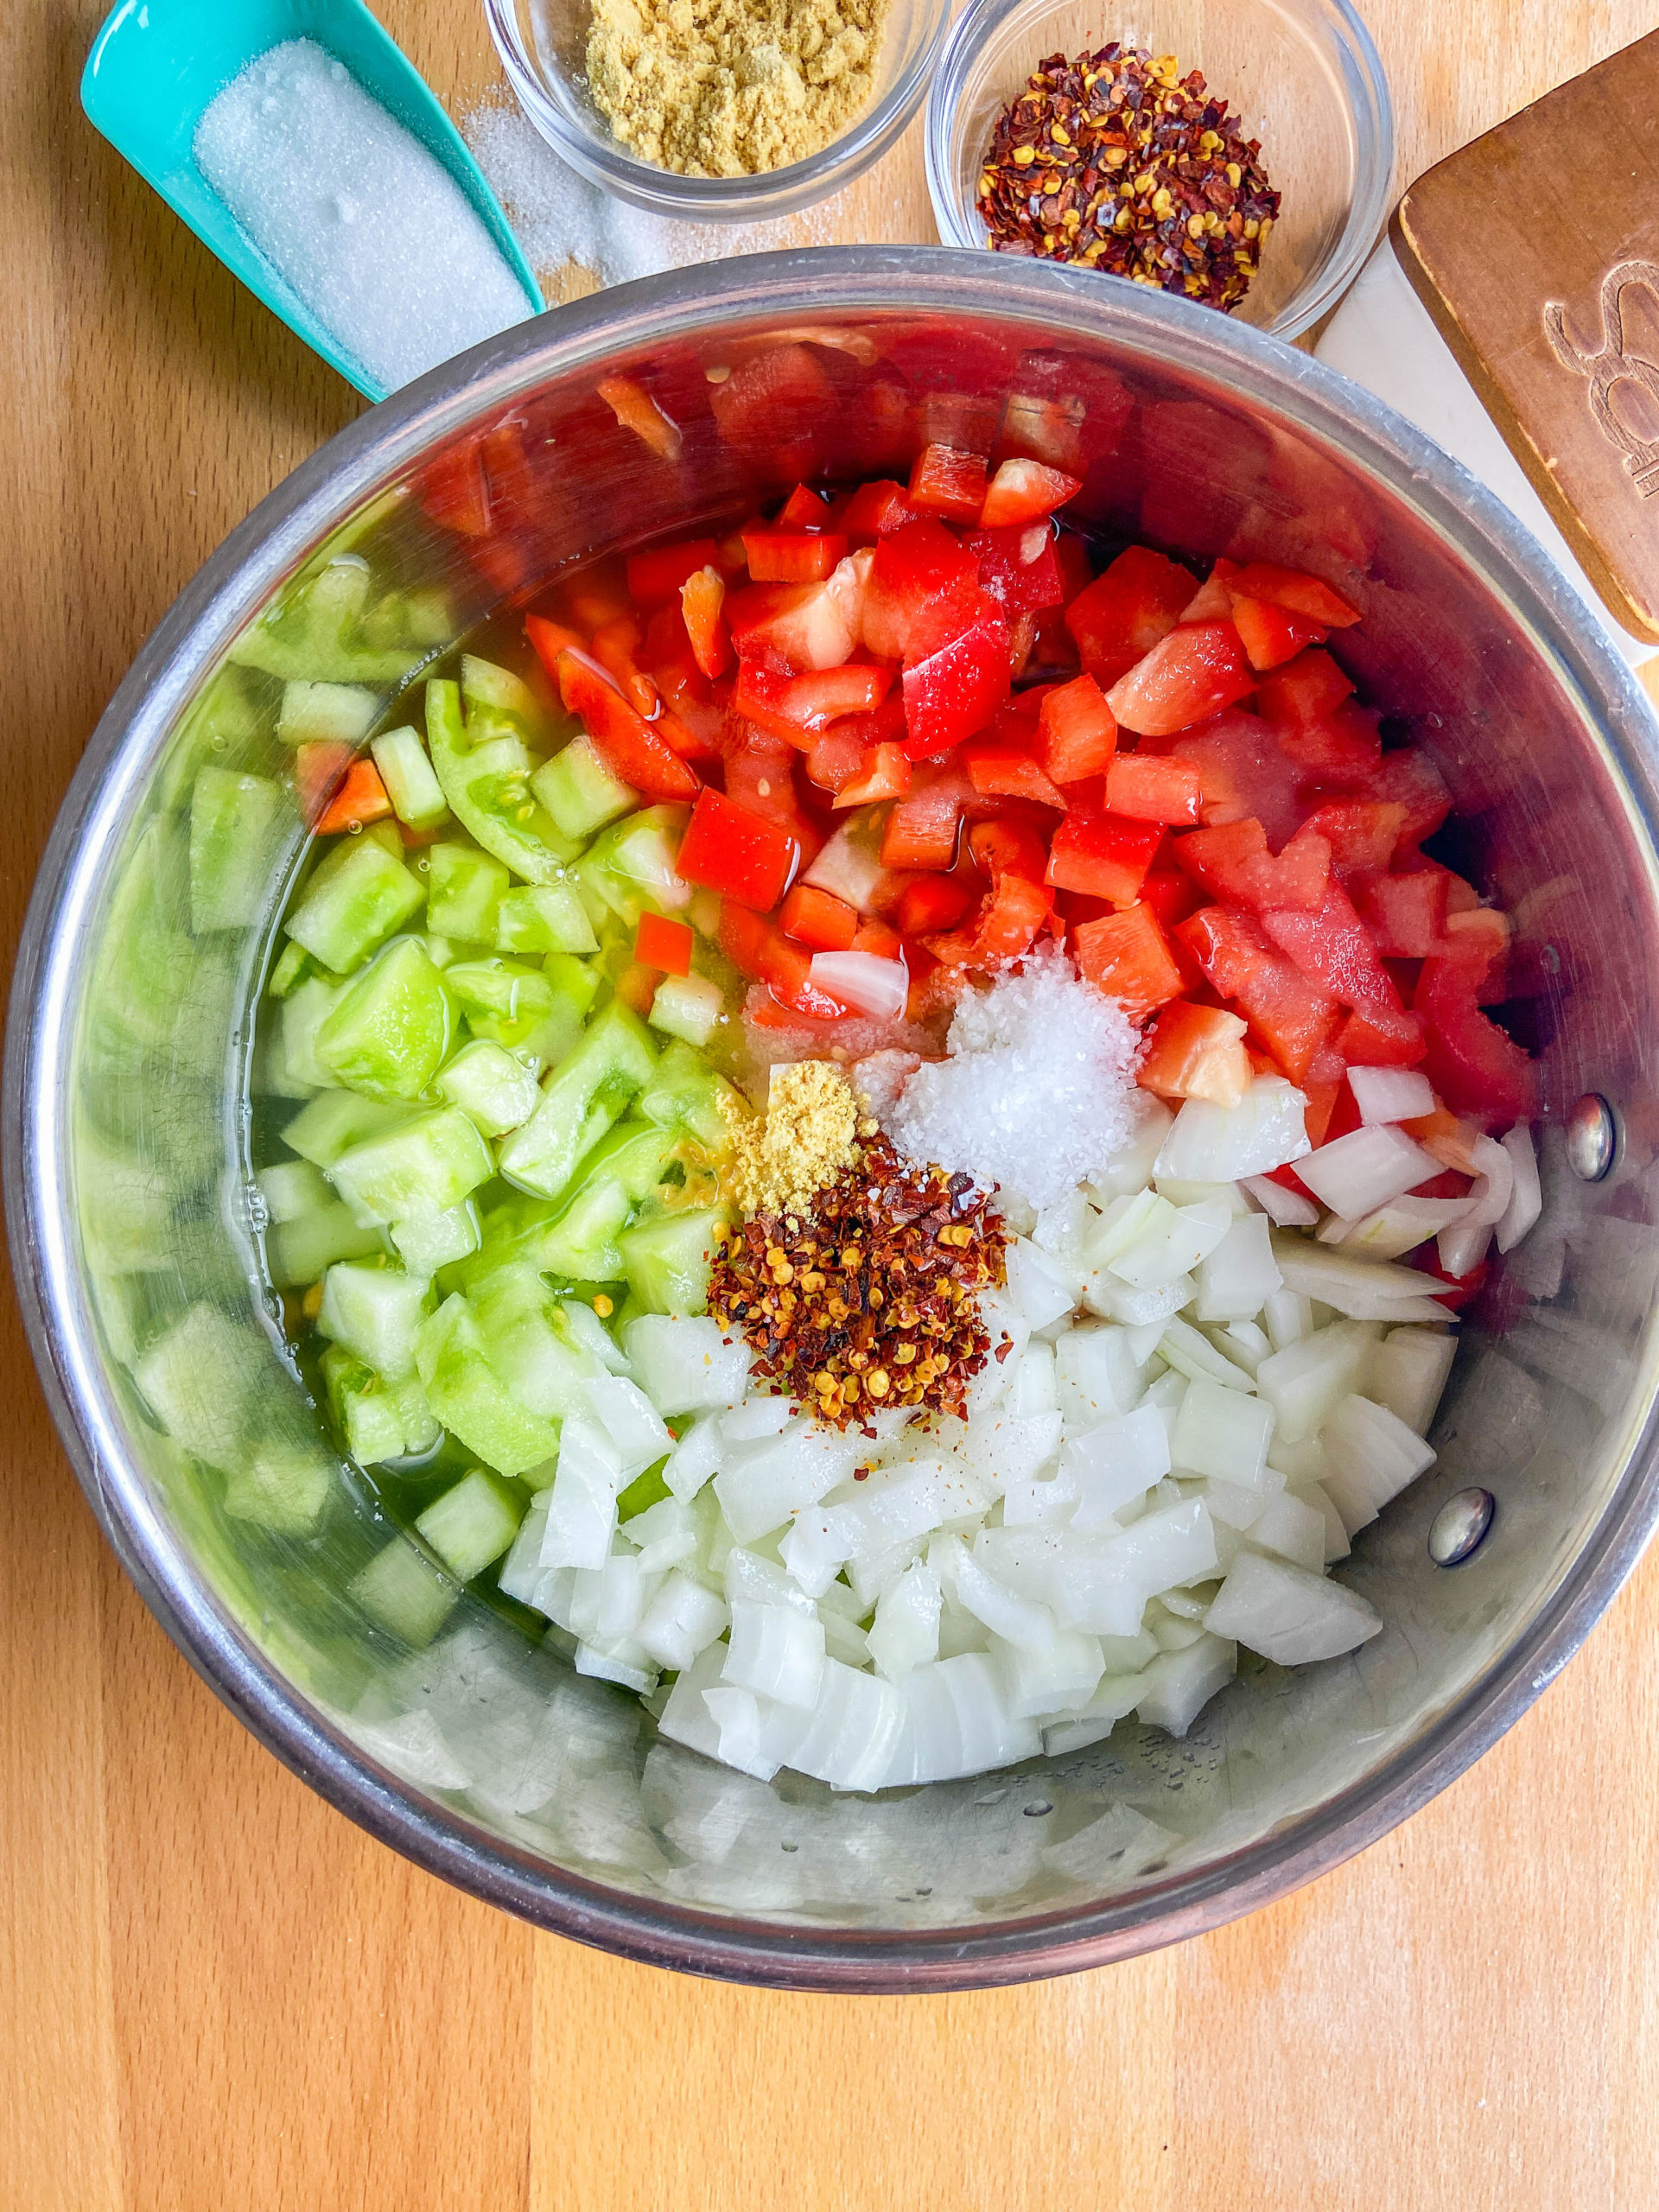 Overhead photo of relish ingredients in a saucepan.